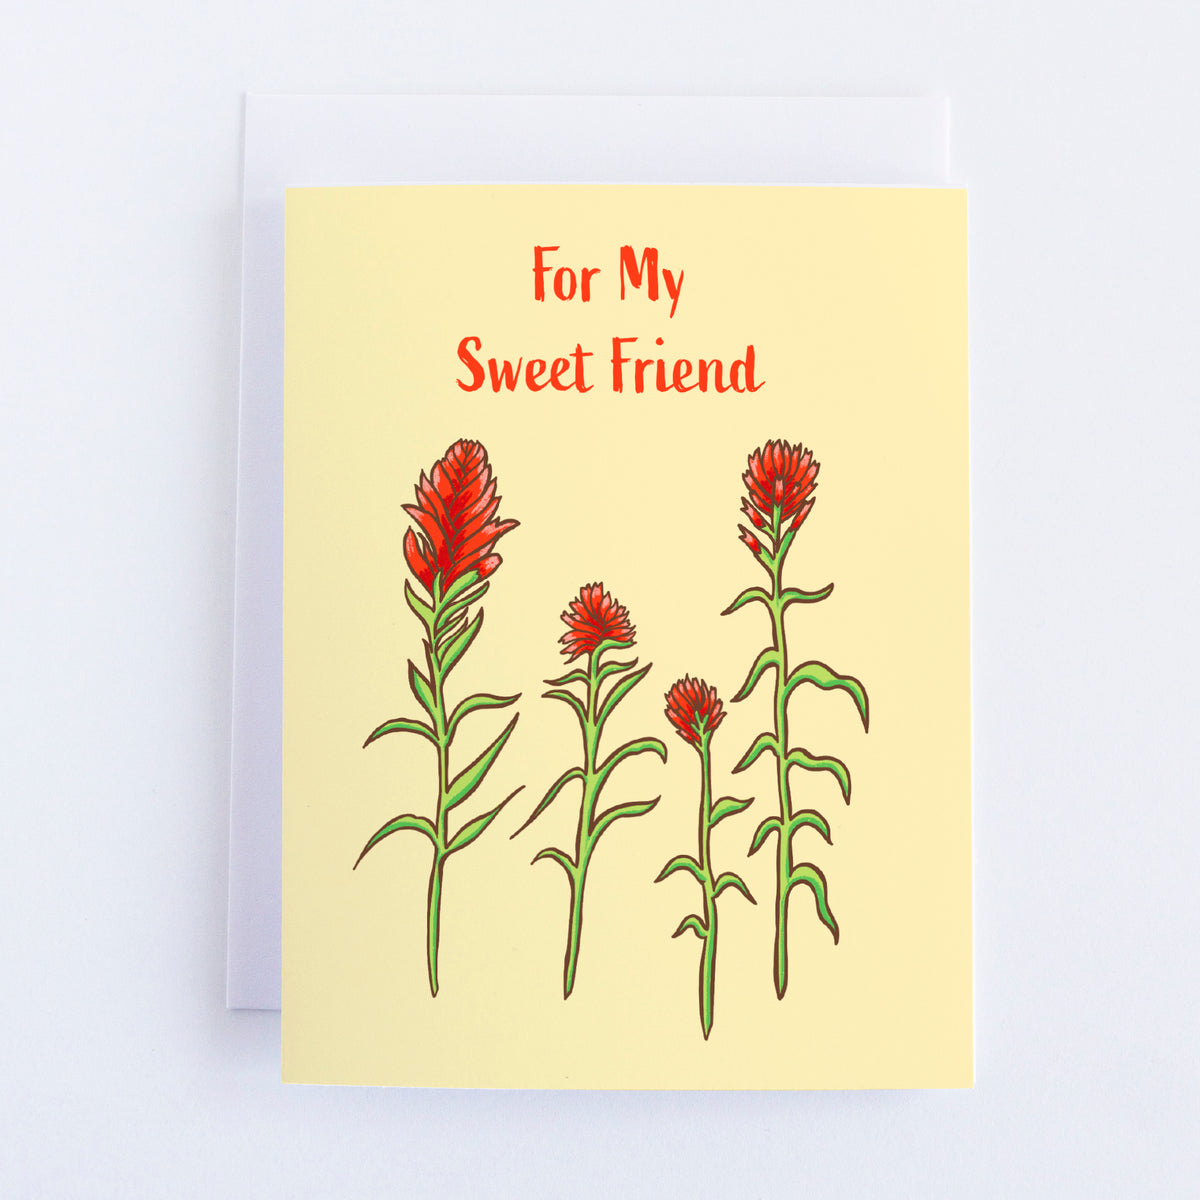 A light yellow card with four red paintbrush wildflower stems painted on the front. The text above it reads For My Sweet Friend.